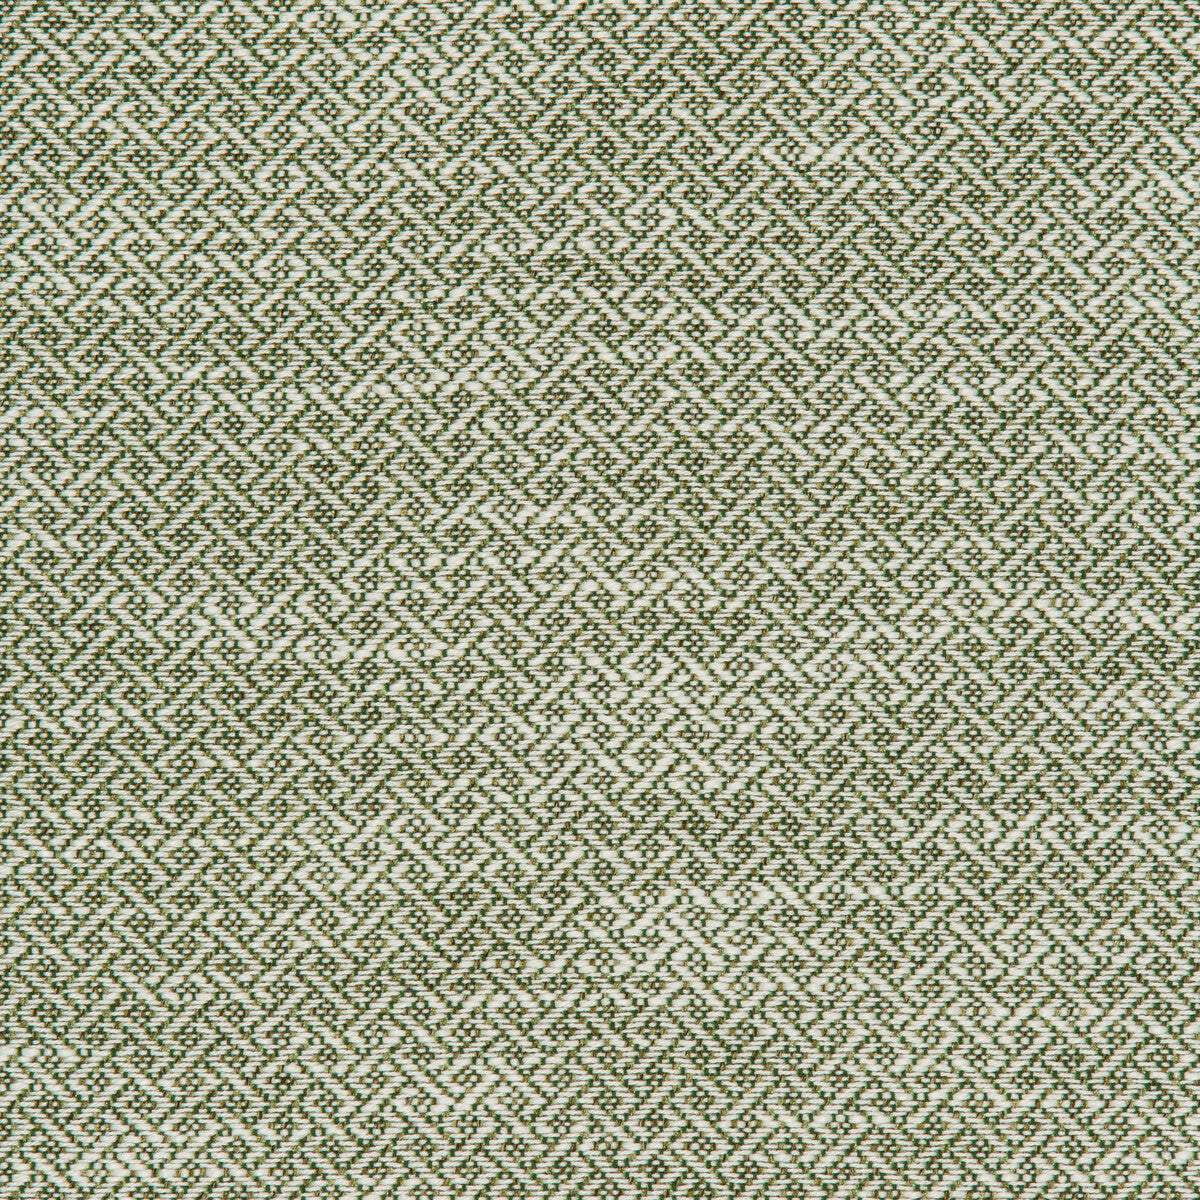 Kravet Design fabric in 36086-31 color - pattern 36086.31.0 - by Kravet Design in the Inside Out Performance Fabrics collection